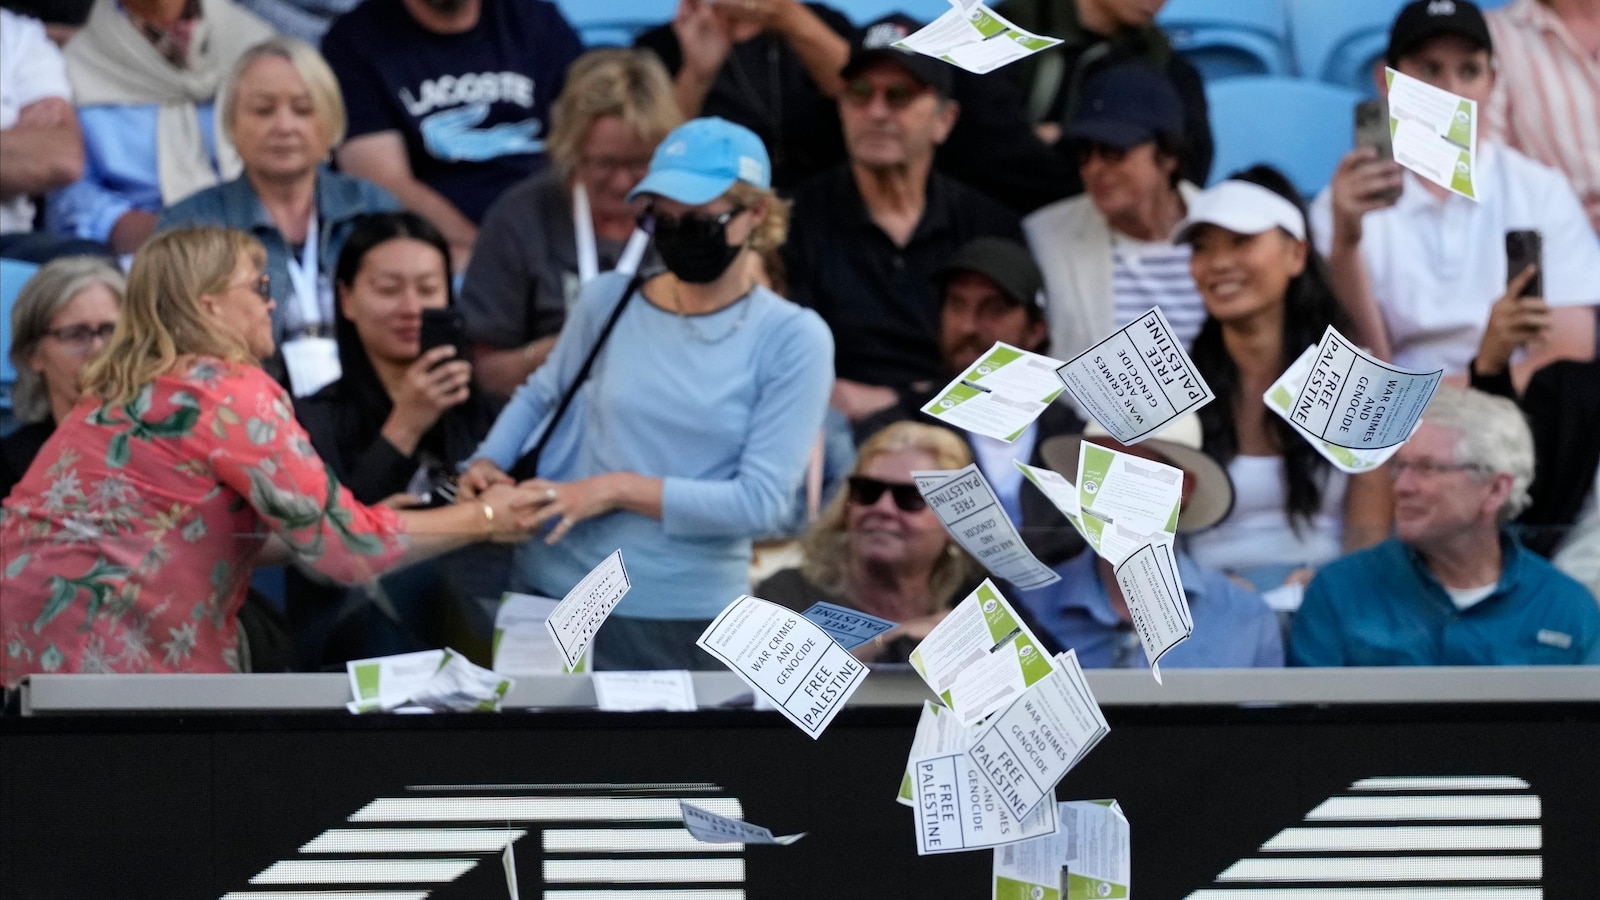 Disruption at Australian Open as Protester Throws Papers on Court during Zverev, Norrie Match